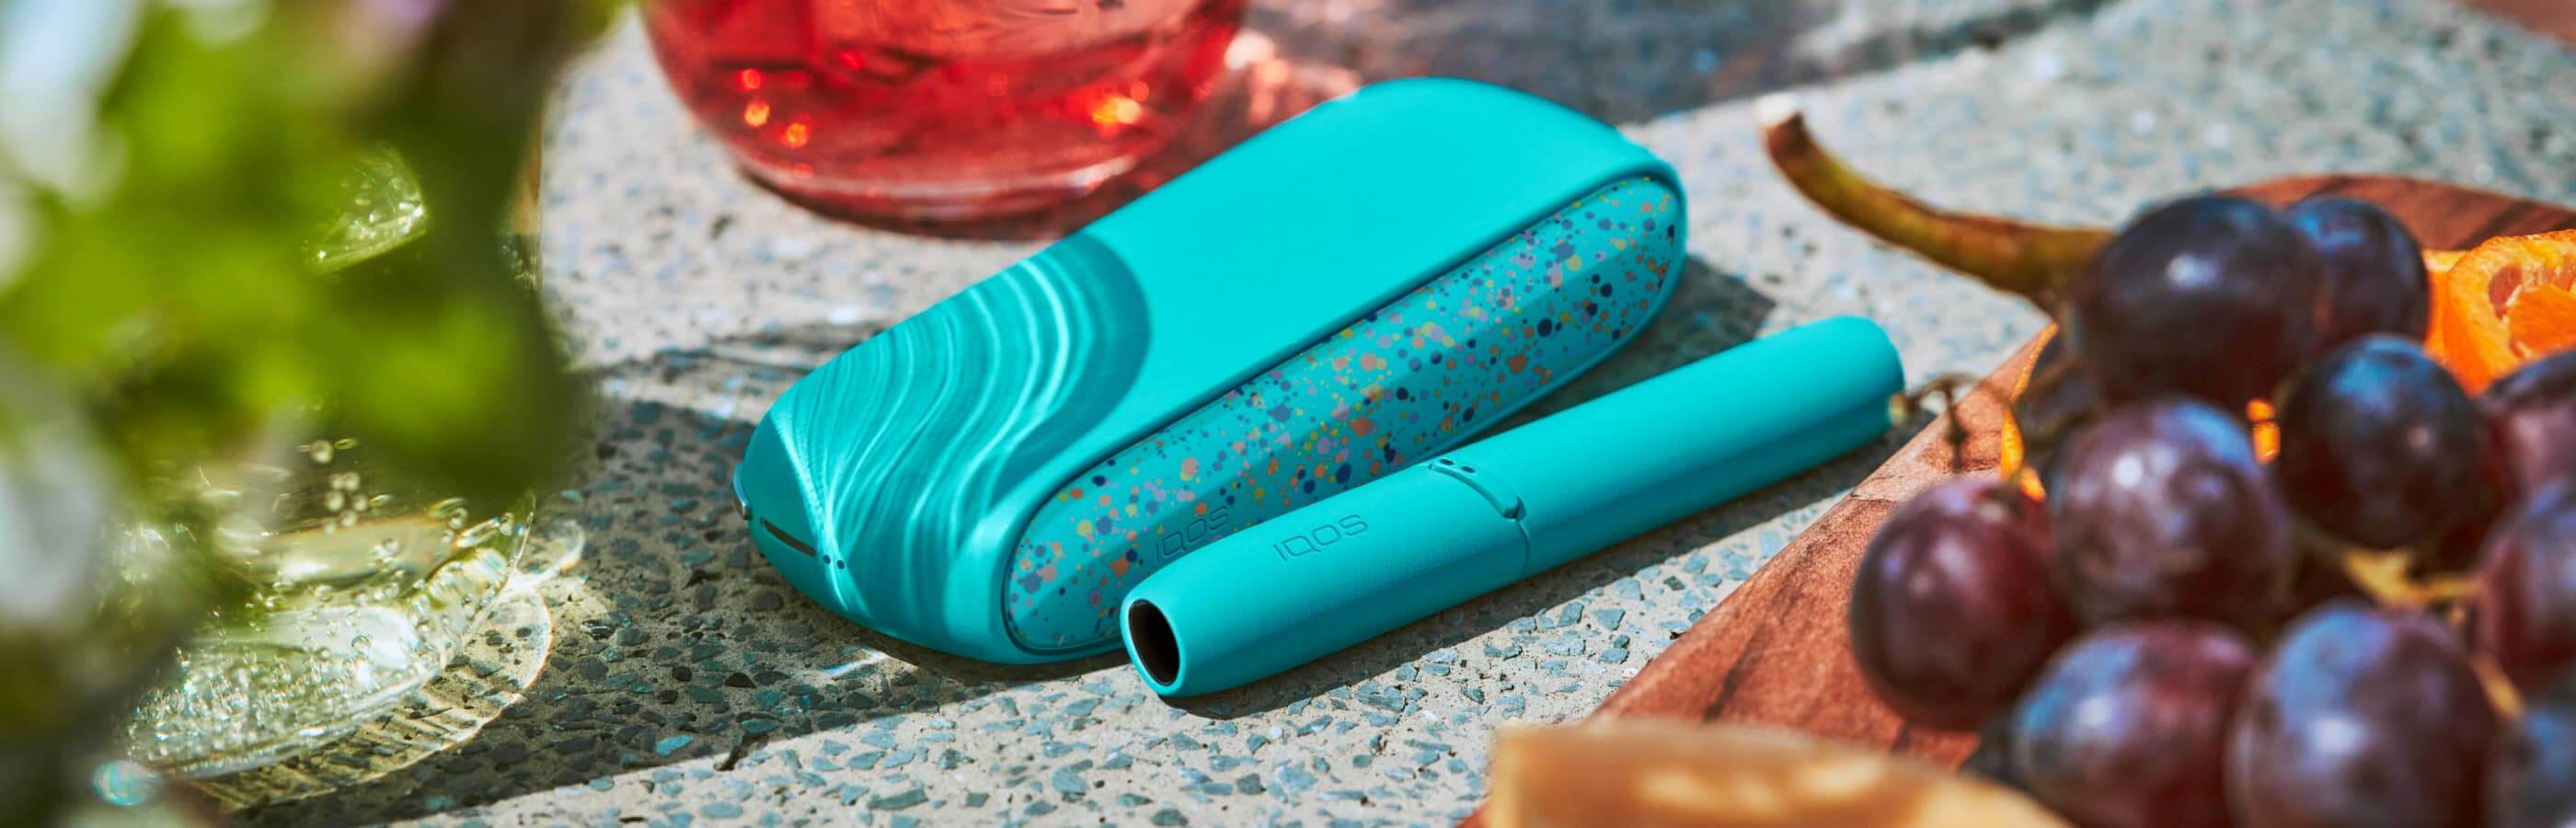 The WE Edition IQOS 3 DUO limited edition charger in turquoise with flecks of color on the door cover next to the holder beside a drink and plate of fruit.​